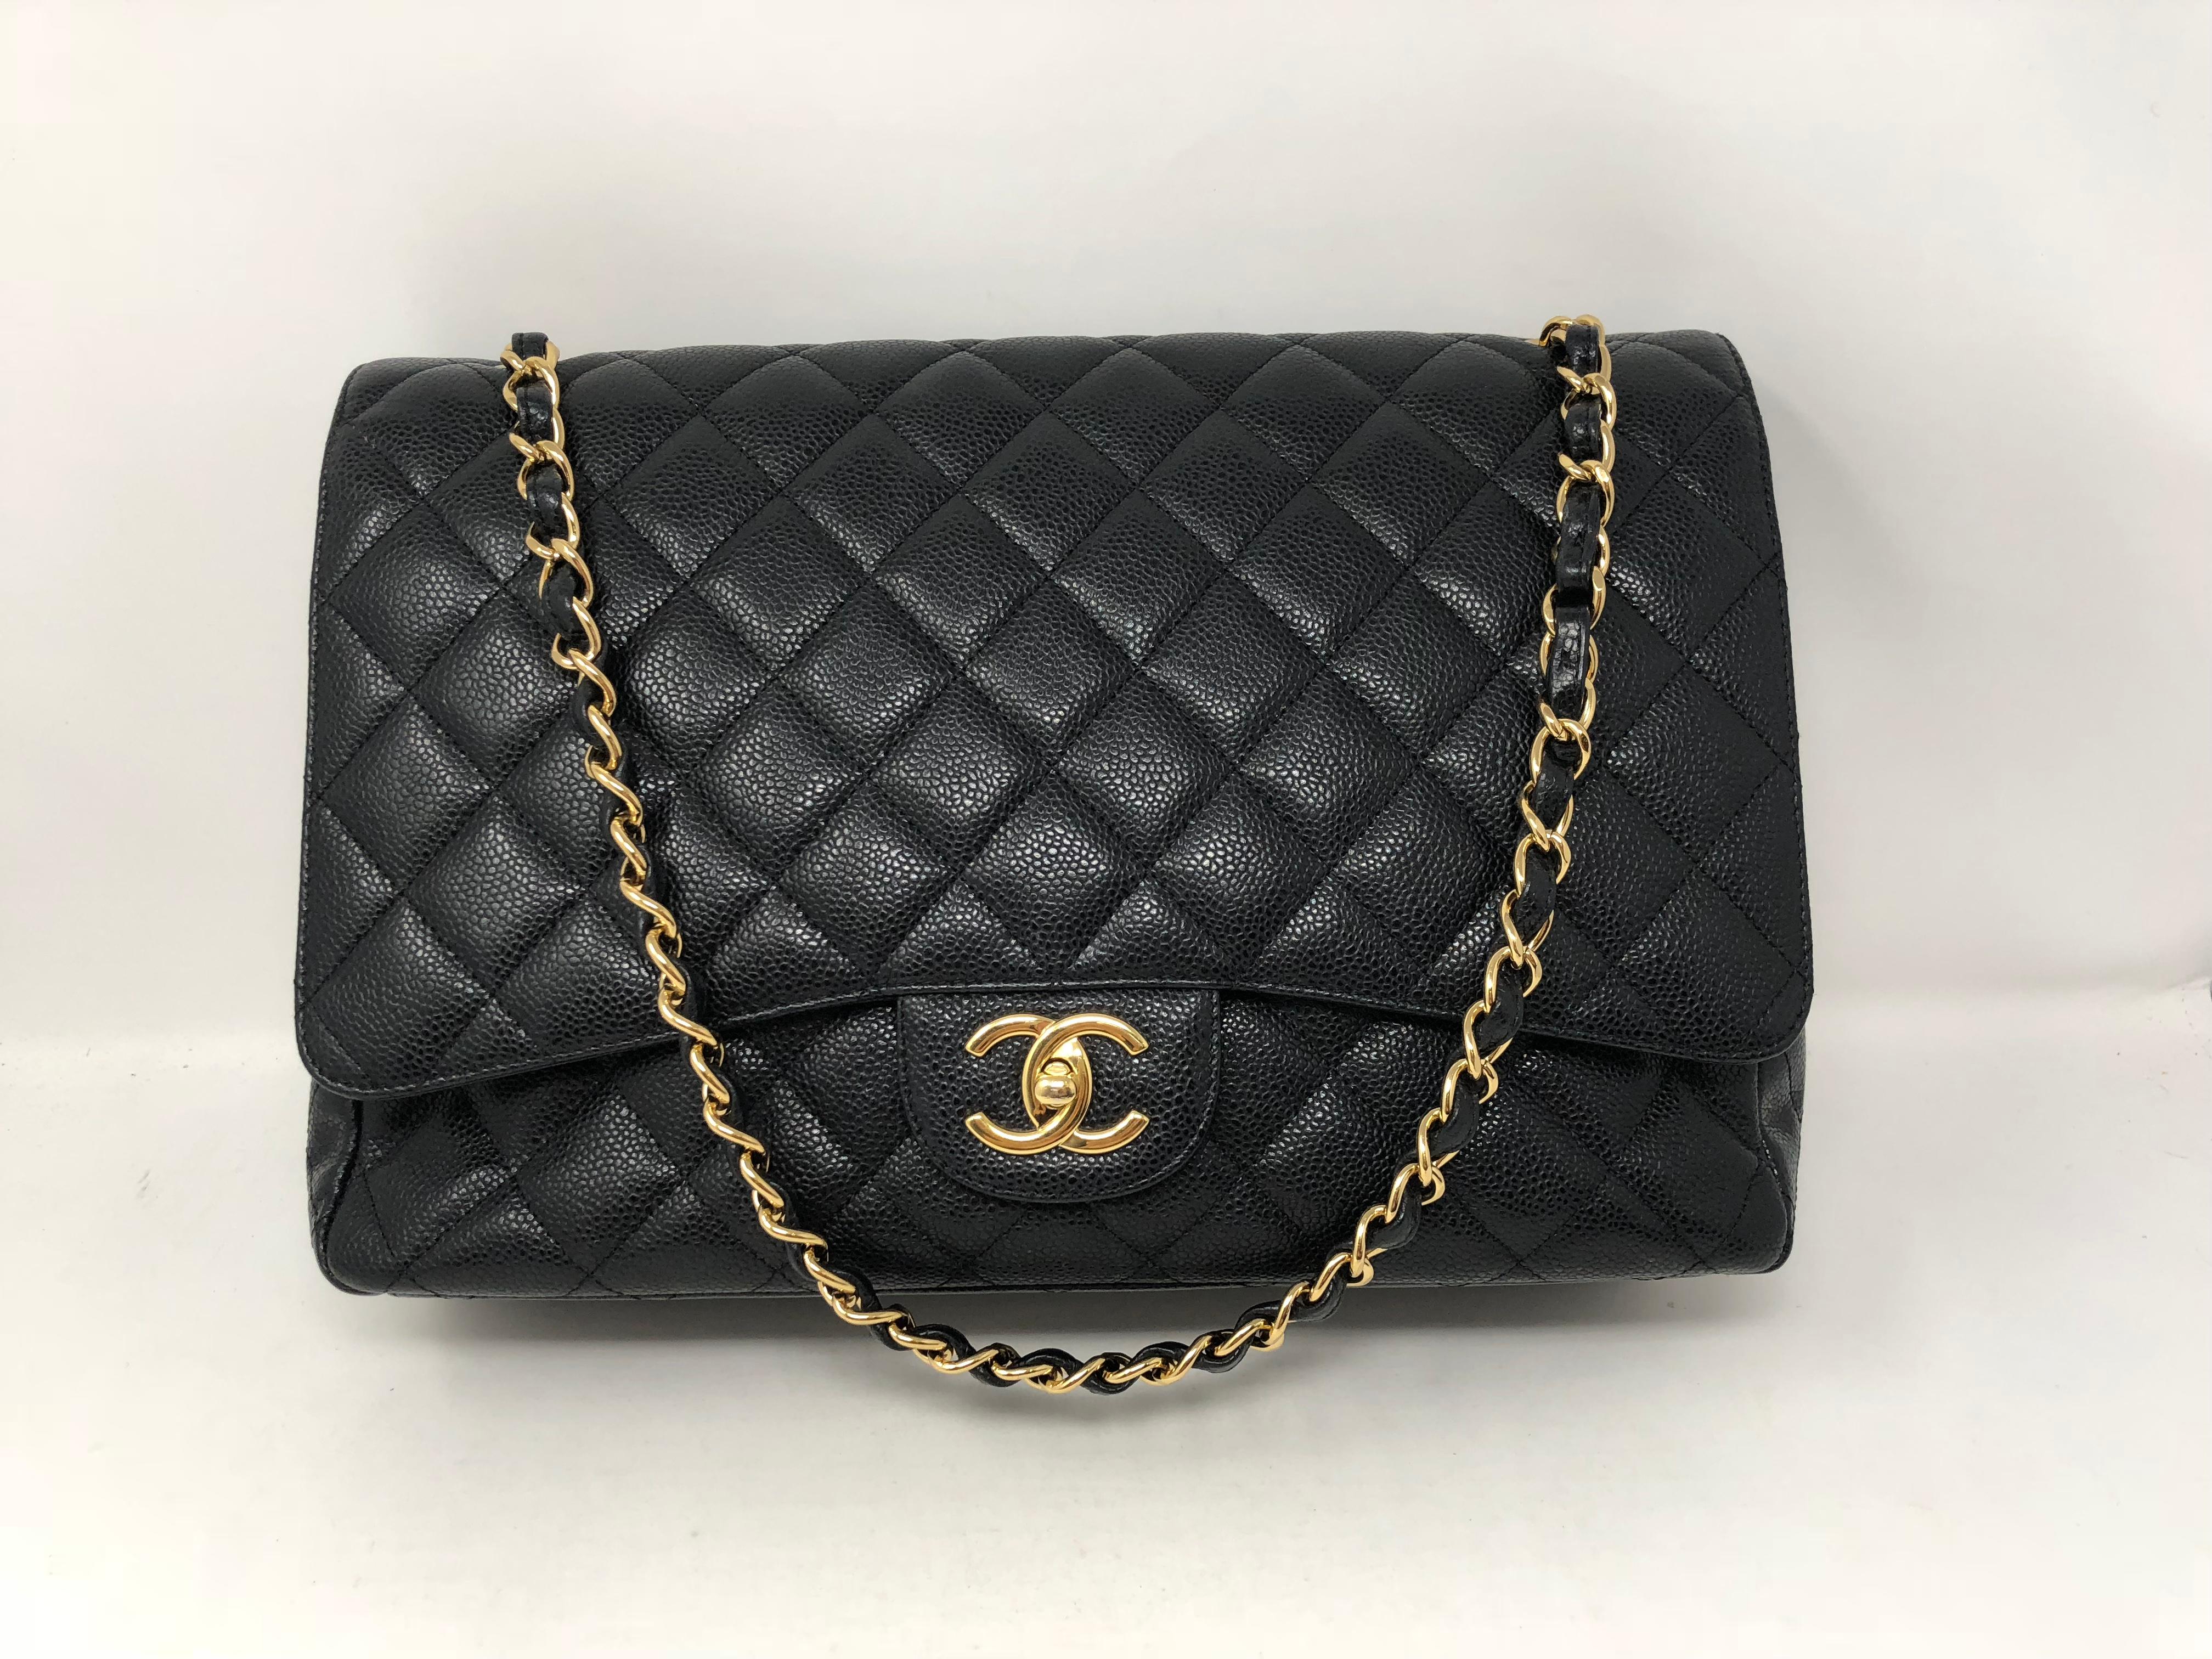 Chanel Black Maxi Caviar leather with gold hardware. Pristine mint condition. Black caviar leather is very durable and highly sought after. This is the largest size of the Classics. Double Flap. Guaranteed authentic. Don't miss out on this one!